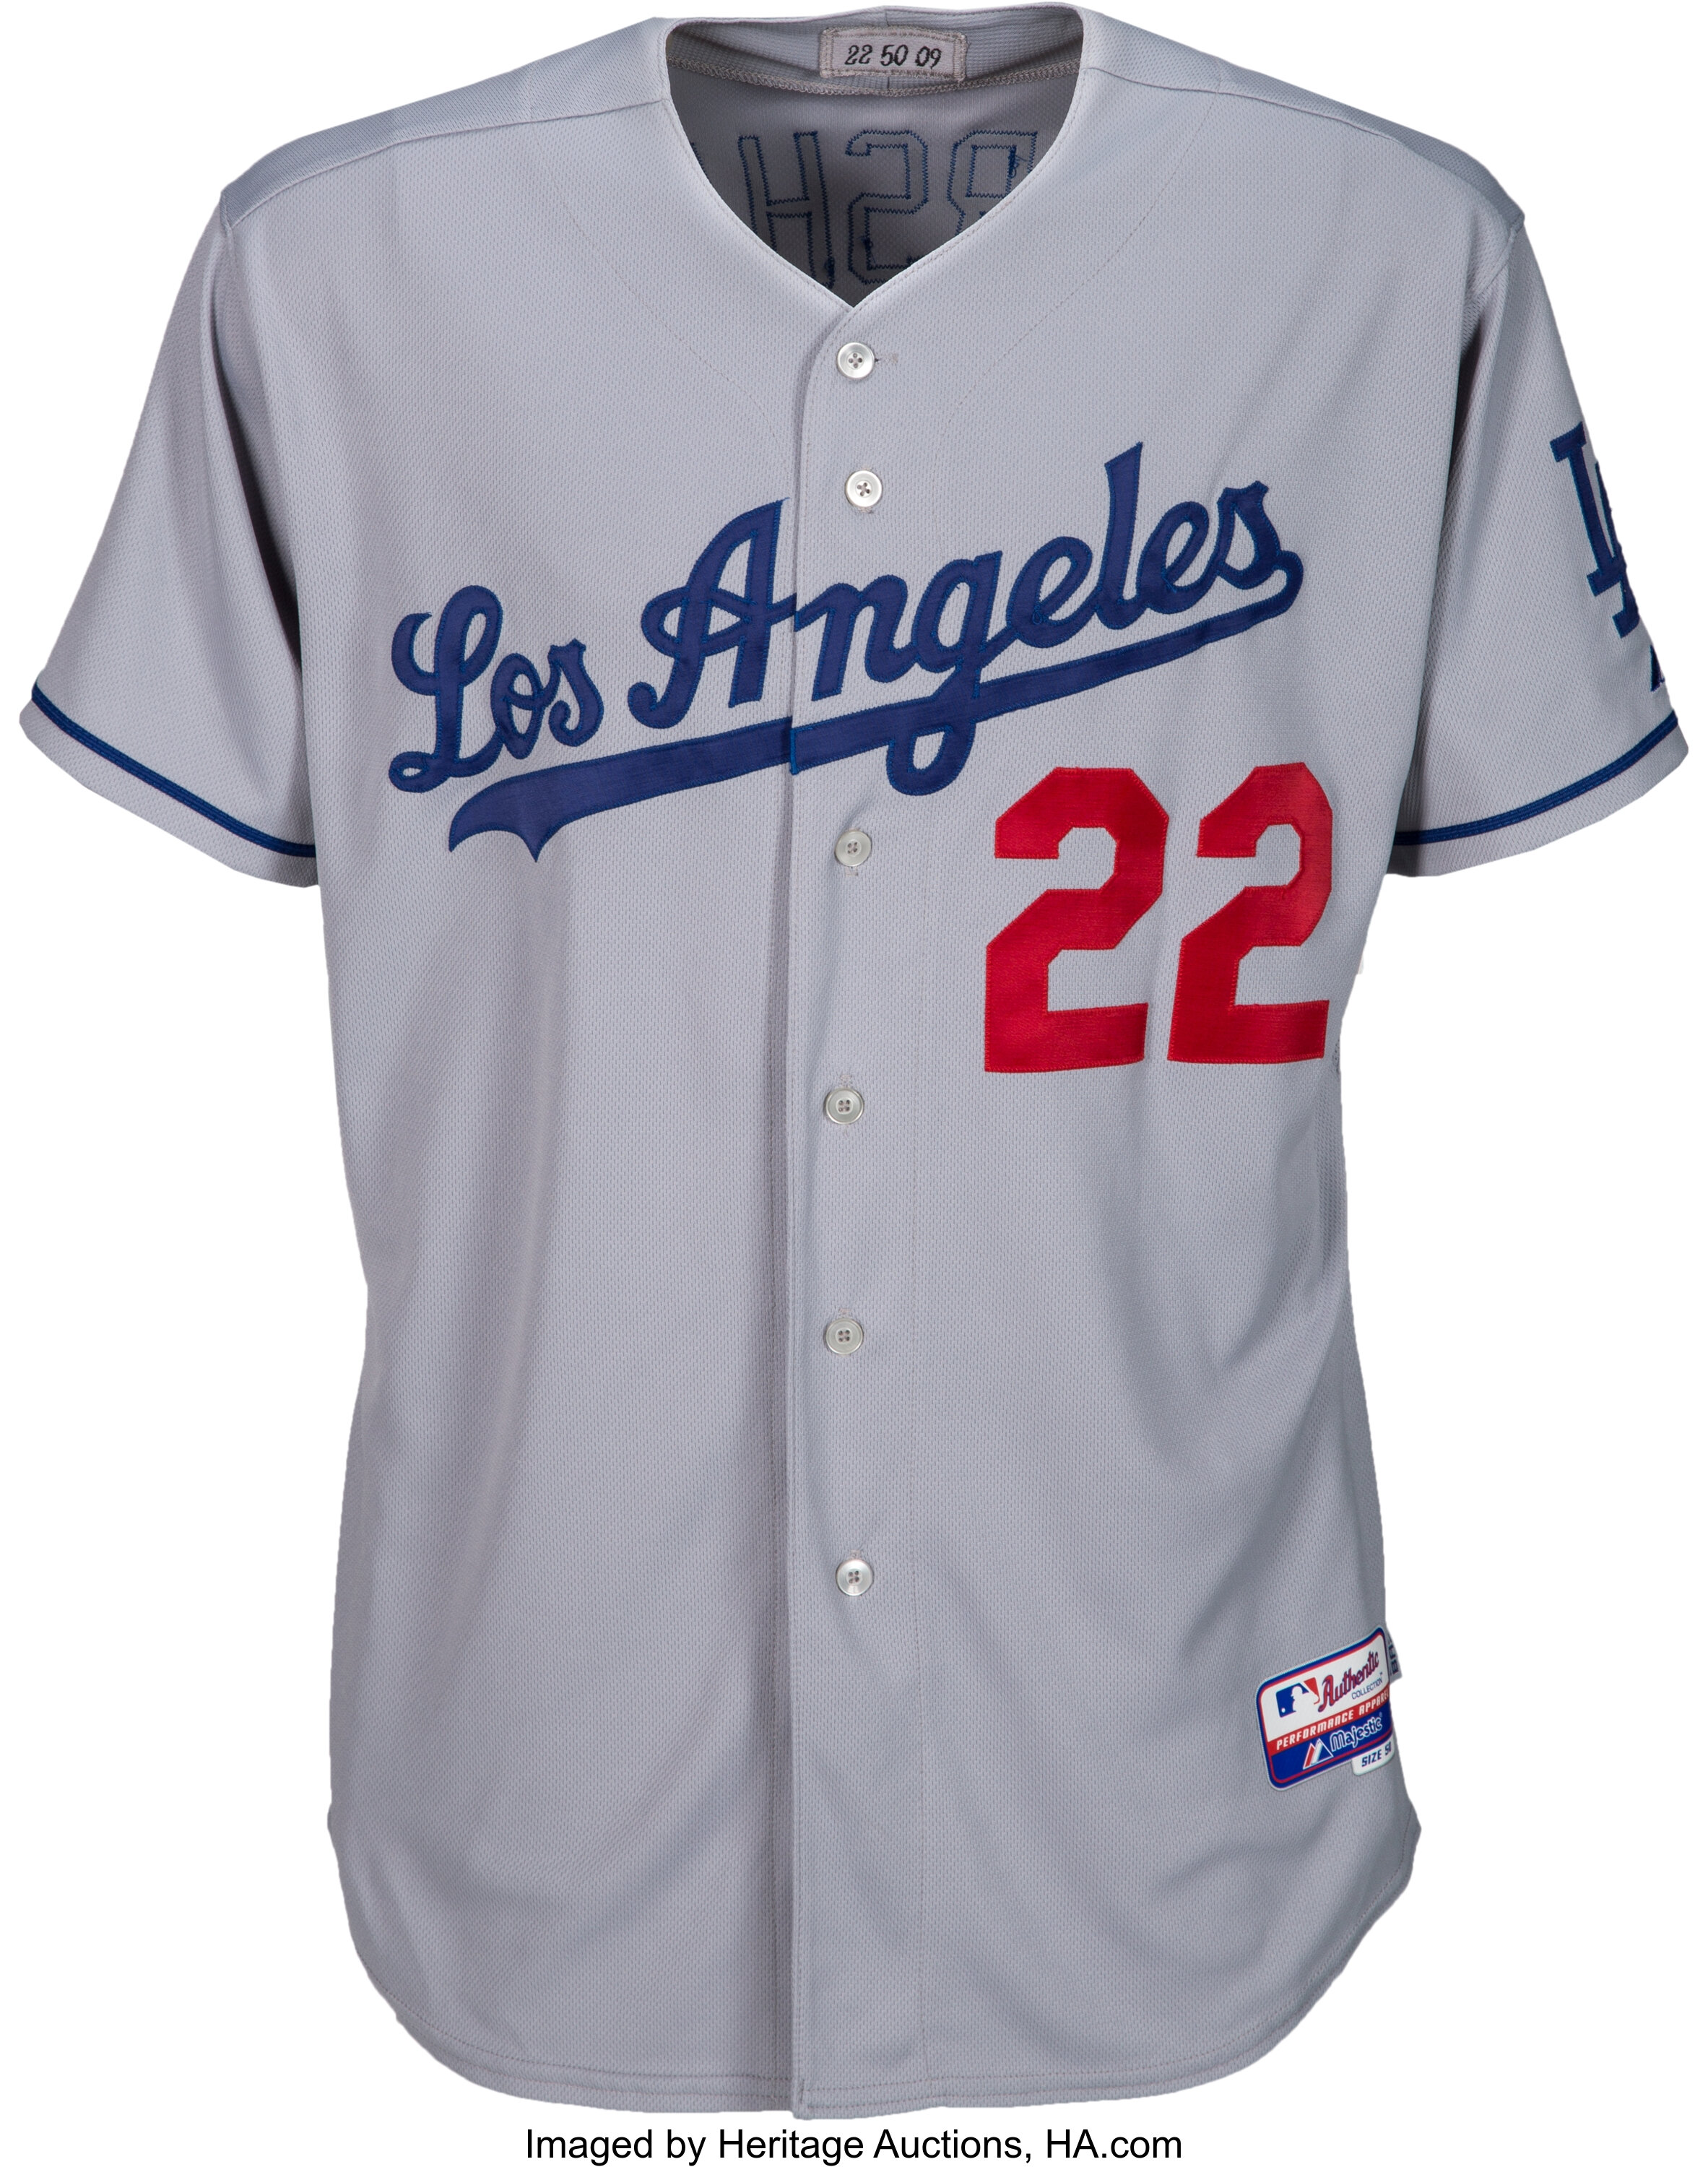 2009 Clayton Kershaw Game Worn & Signed Los Angeles Dodgers Jersey